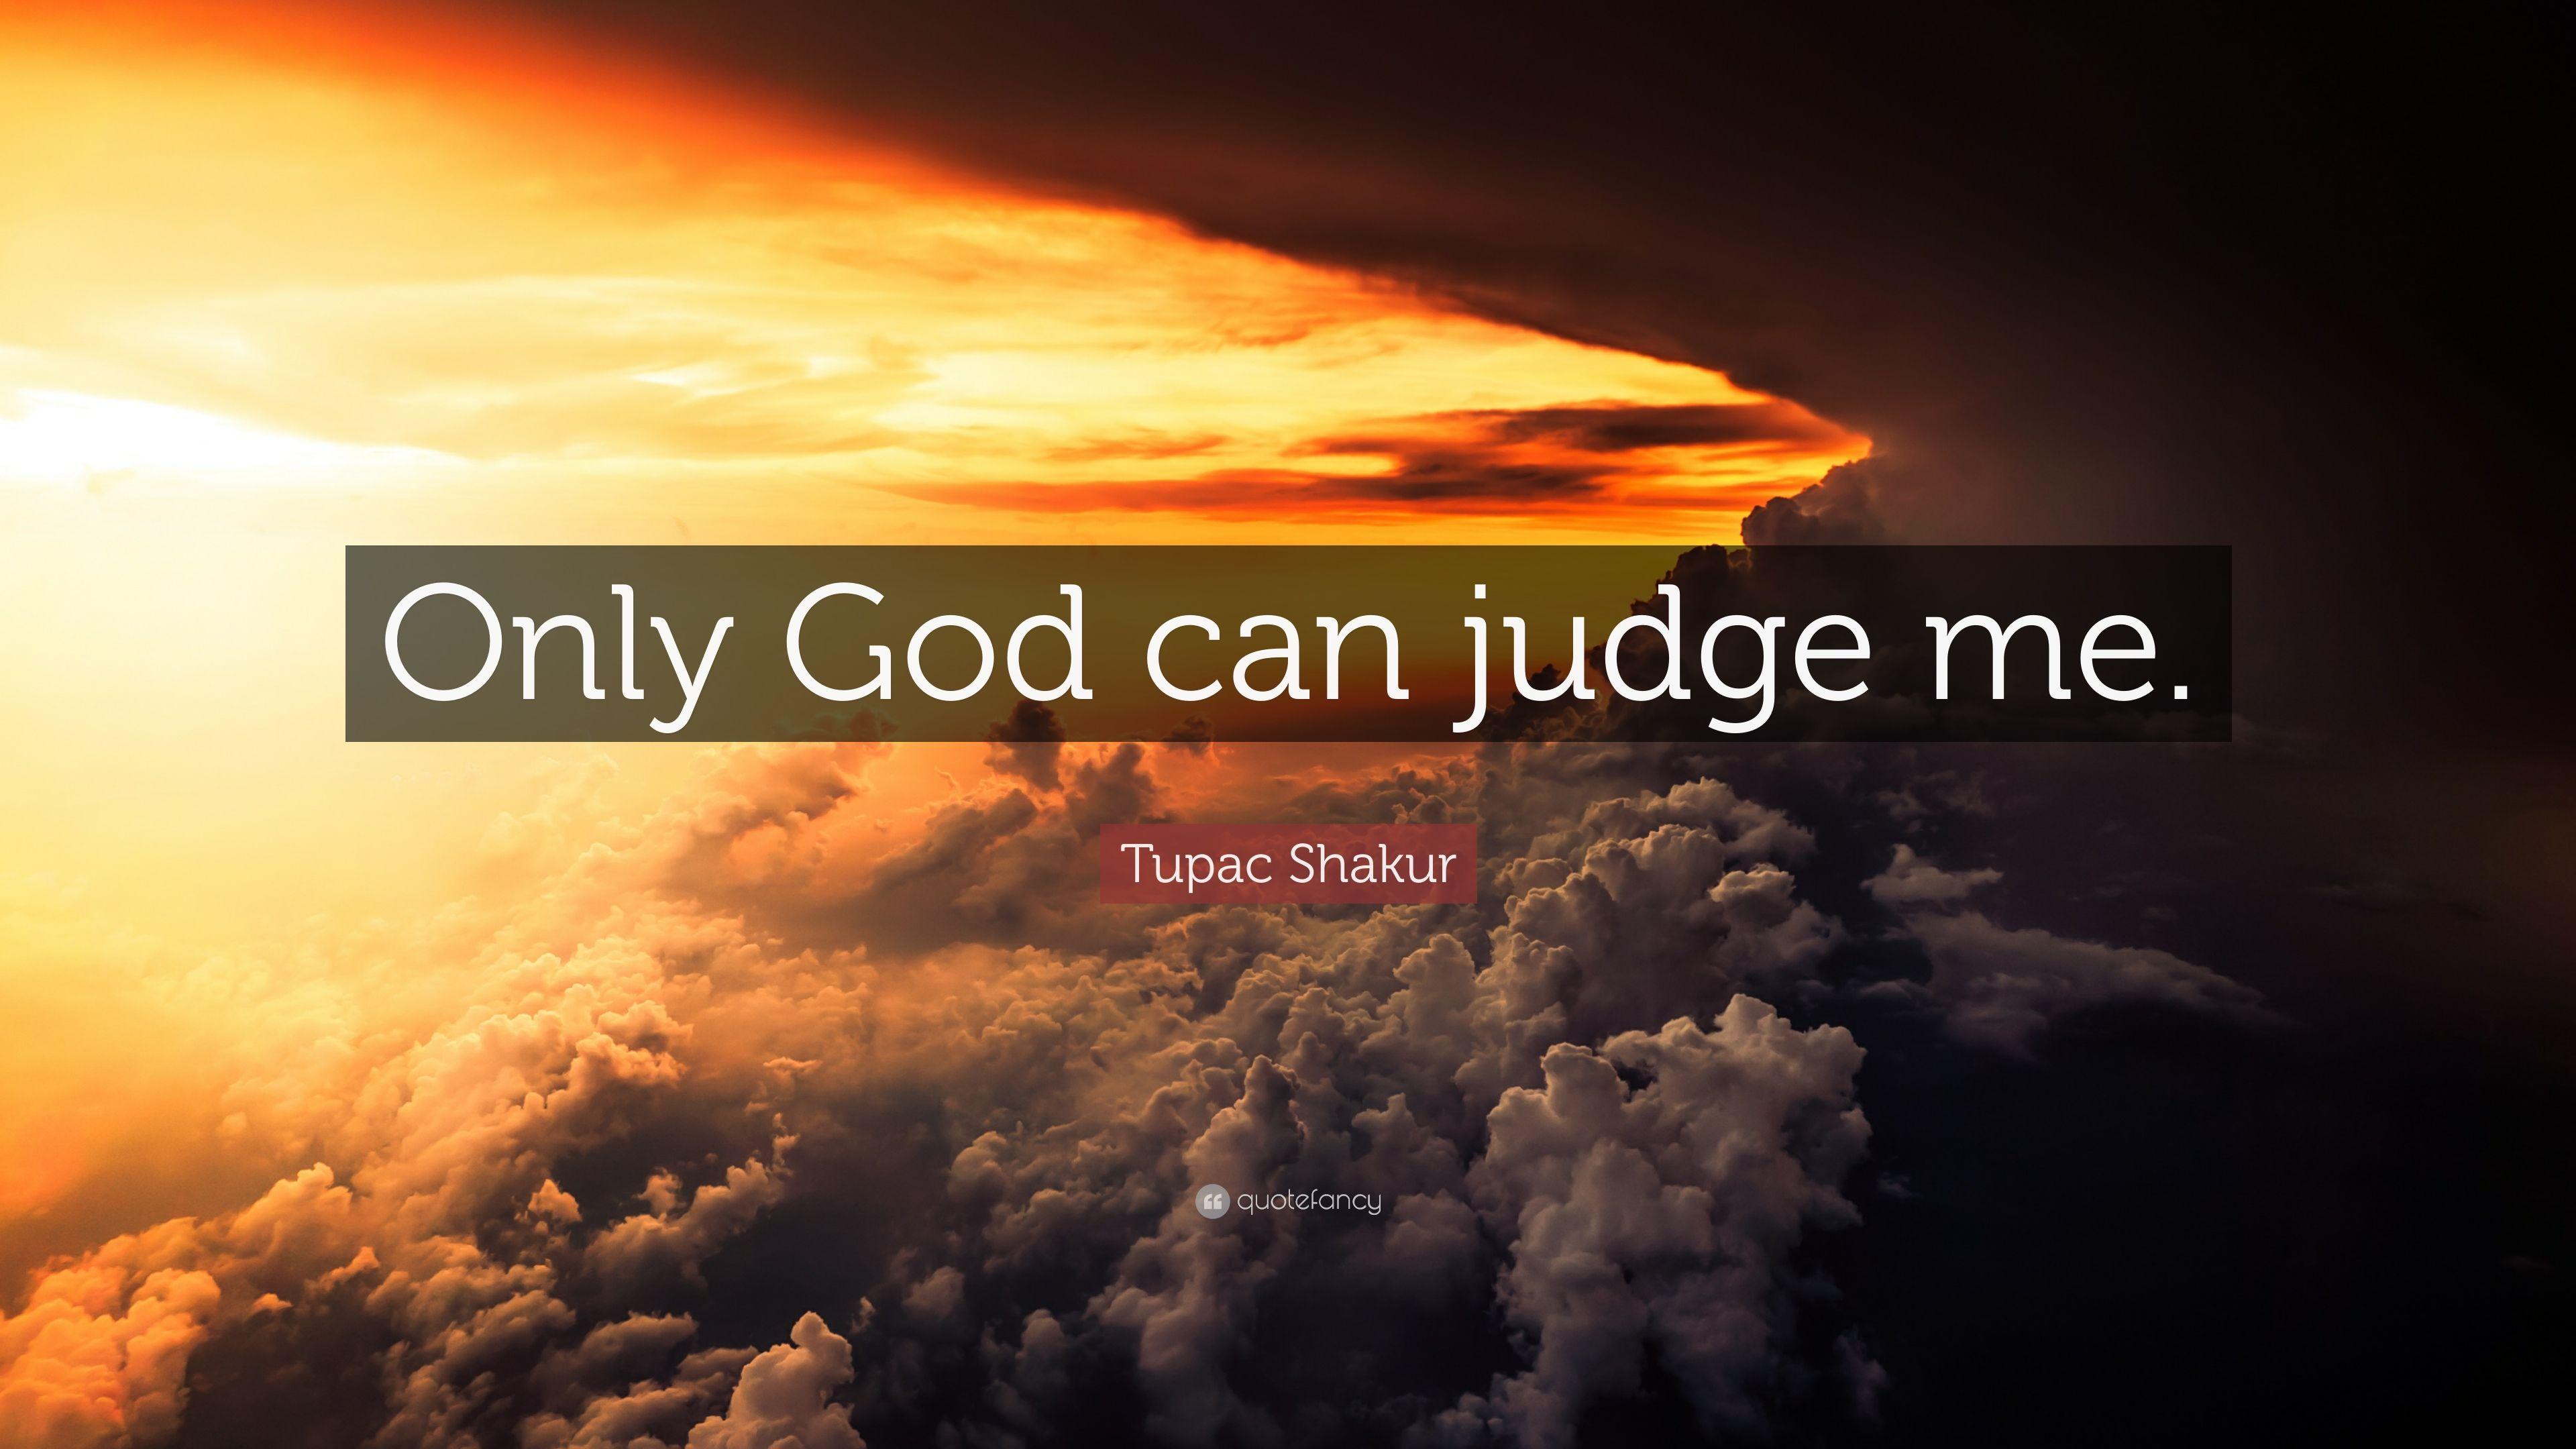 Tupac Shakur Quote: “Only God can judge me.” 12 wallpaper